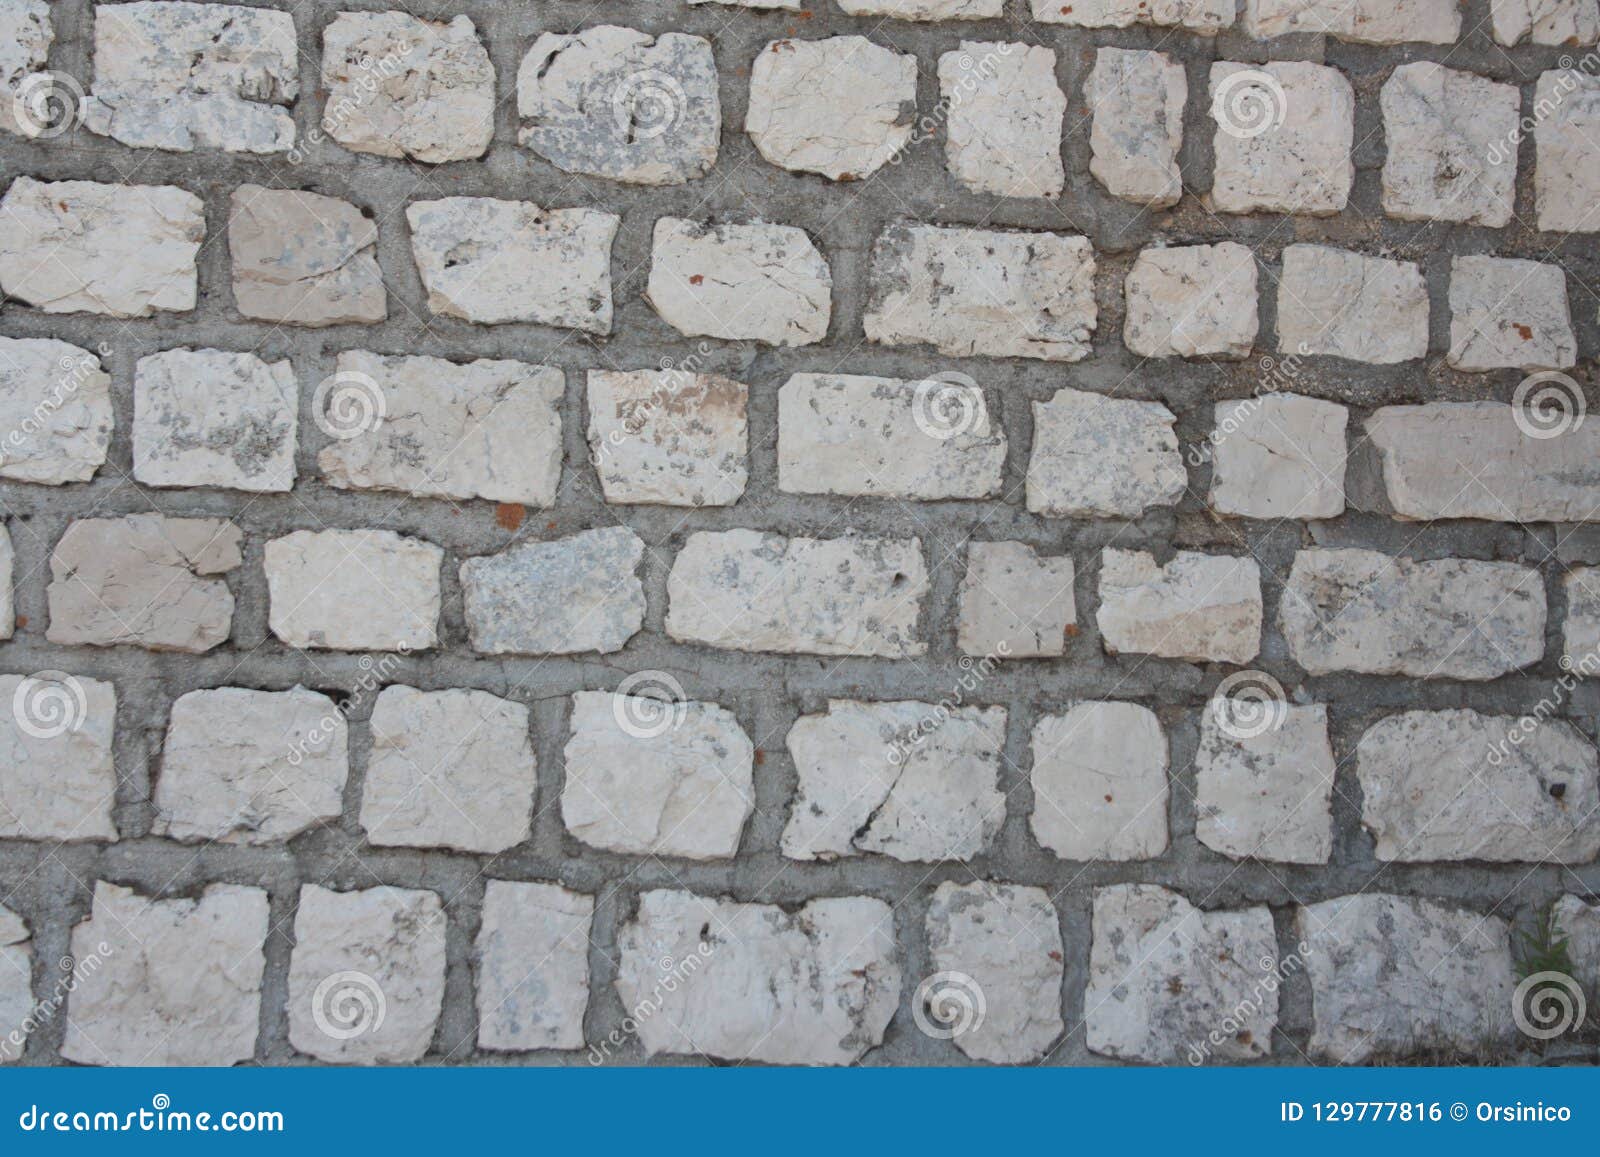 floor of a street with stone tiles. floor of a street with stone tiles. archivio fotografico - 78112153